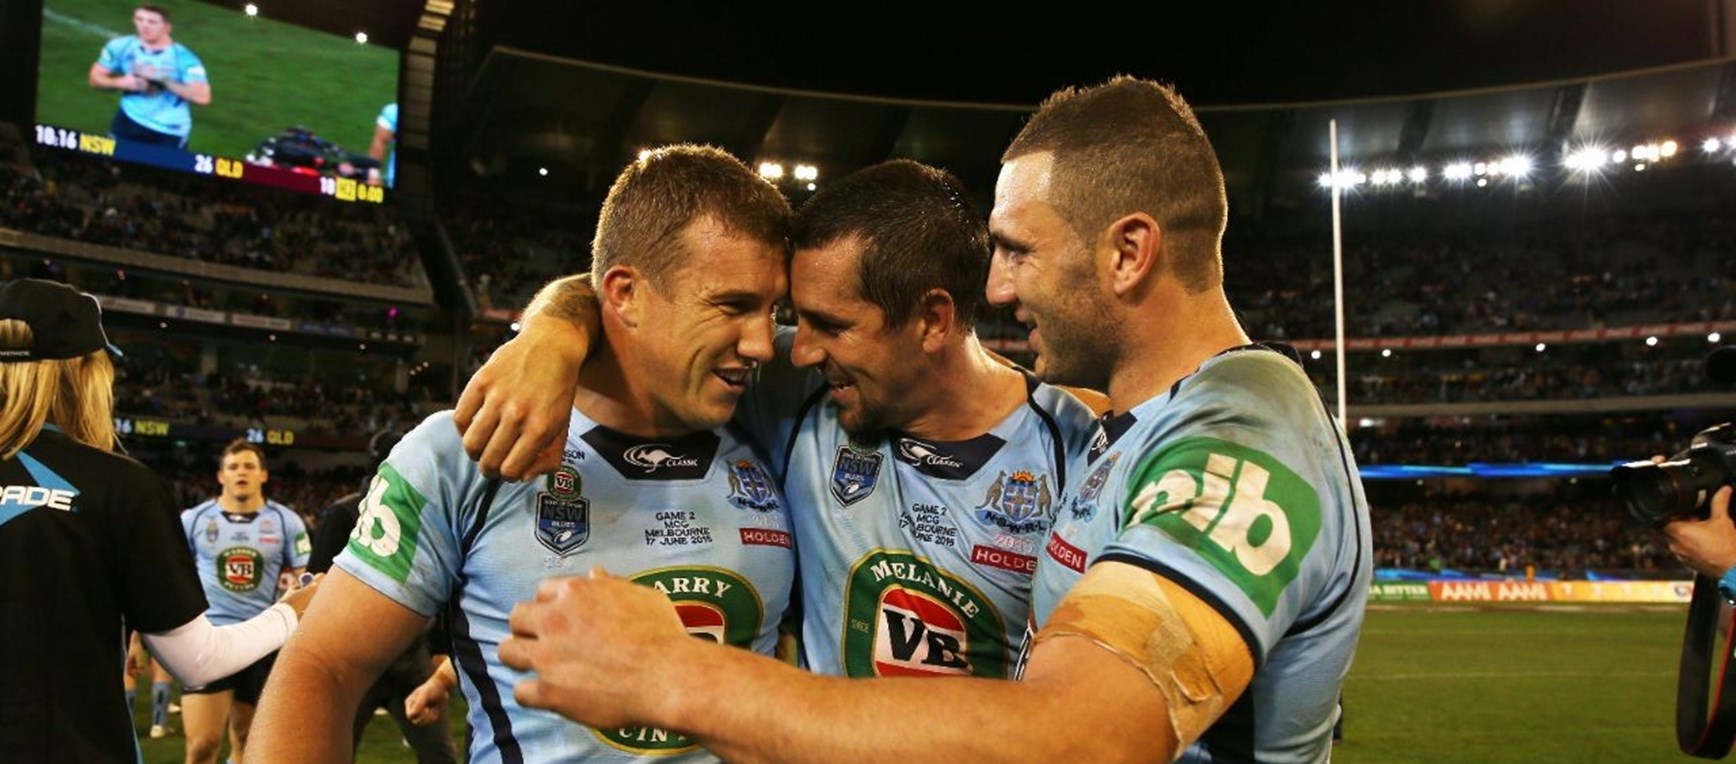 GALLERY: Re-live the NSW VB Blues game 2